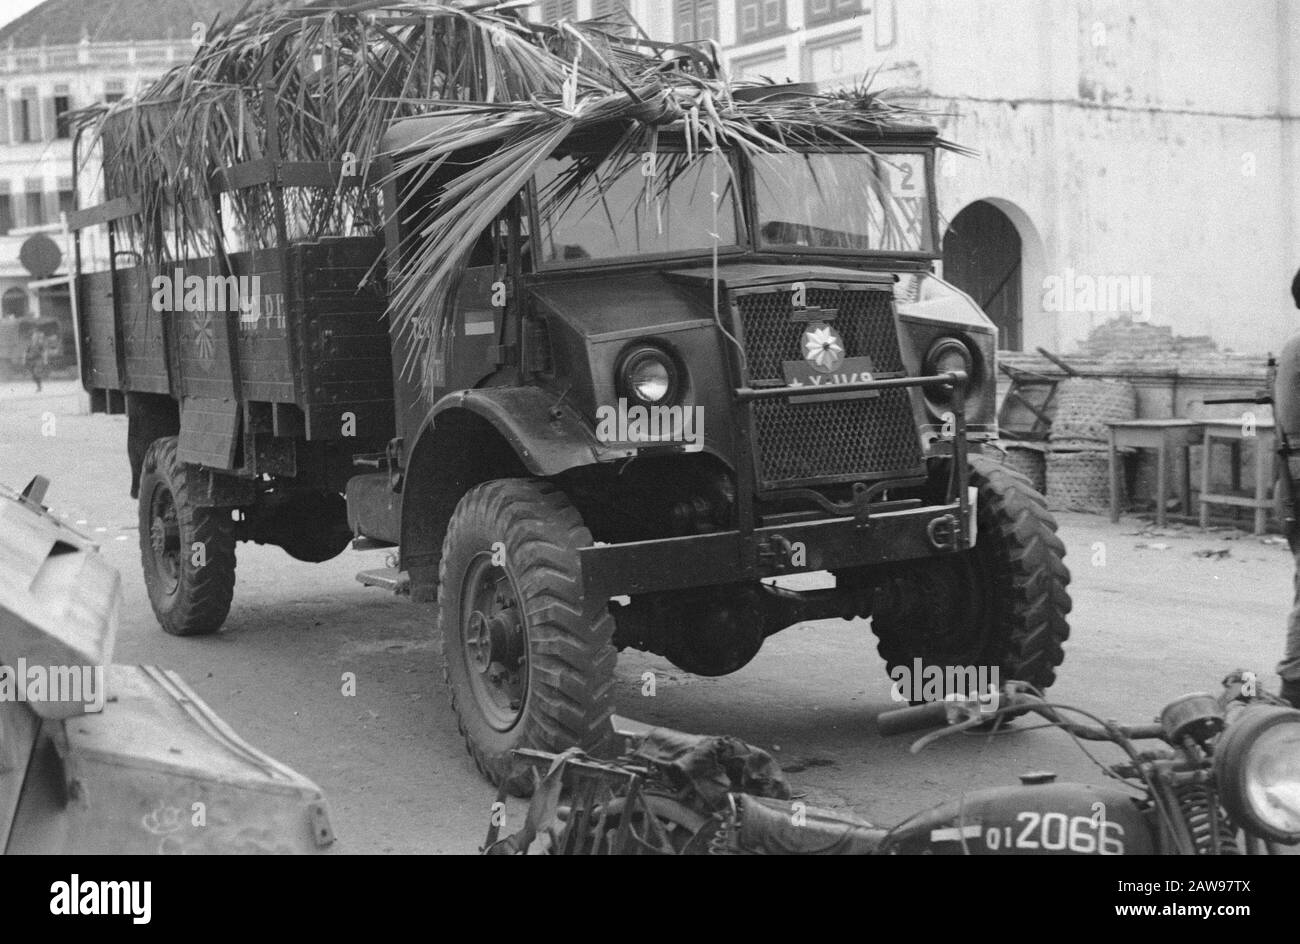 Loeboek Pakem and Baoengan description: Military truck camouflaged with palm branches Date: July 29, 1948 Location: Indonesia, Dutch East Indies, Sumatra Stock Photo